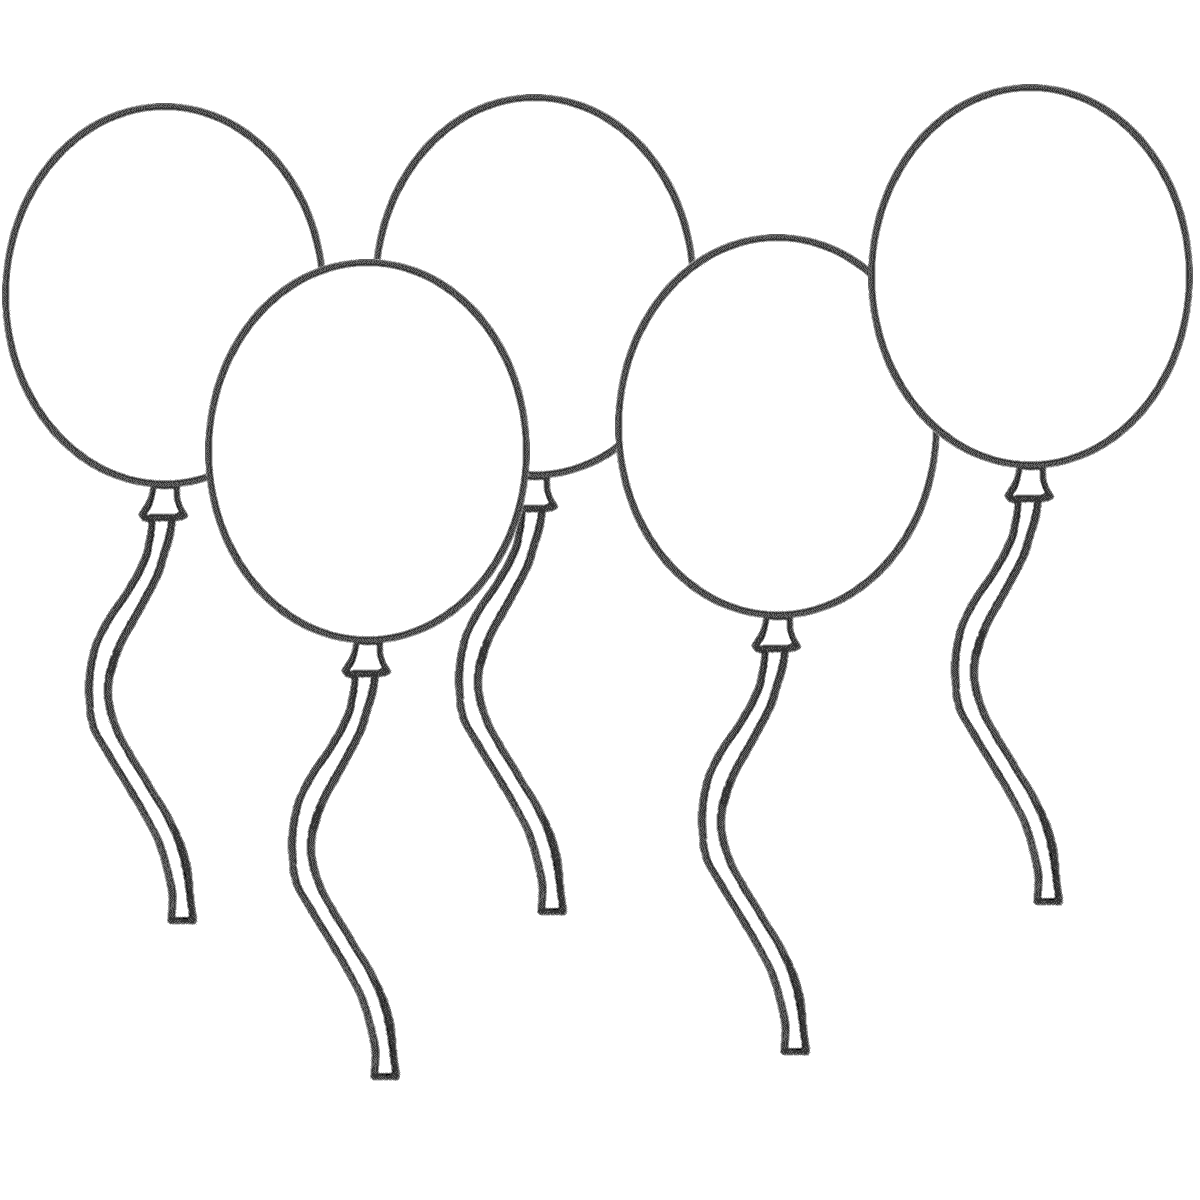 471 Simple Birthday Balloons Coloring Pages with Printable